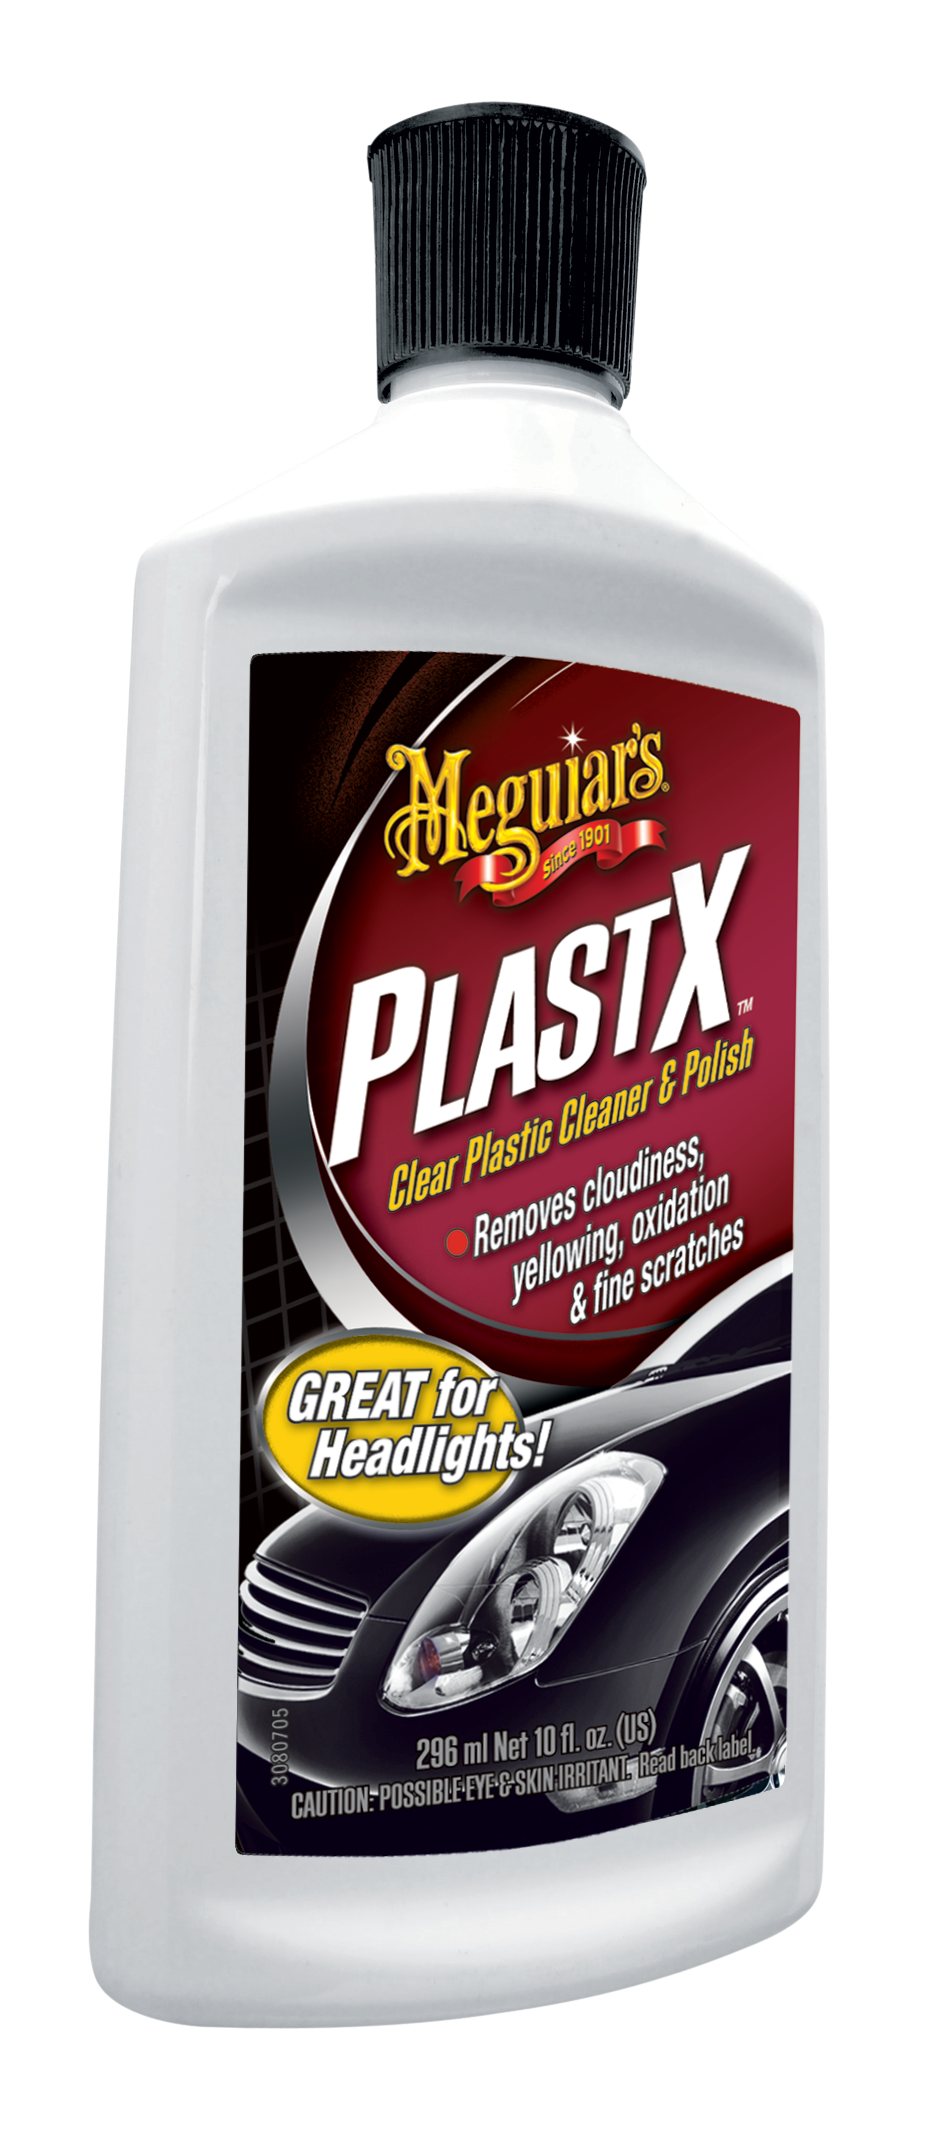 Remove Headlight Yellowing & Headlight Clouding with PlastX Clear